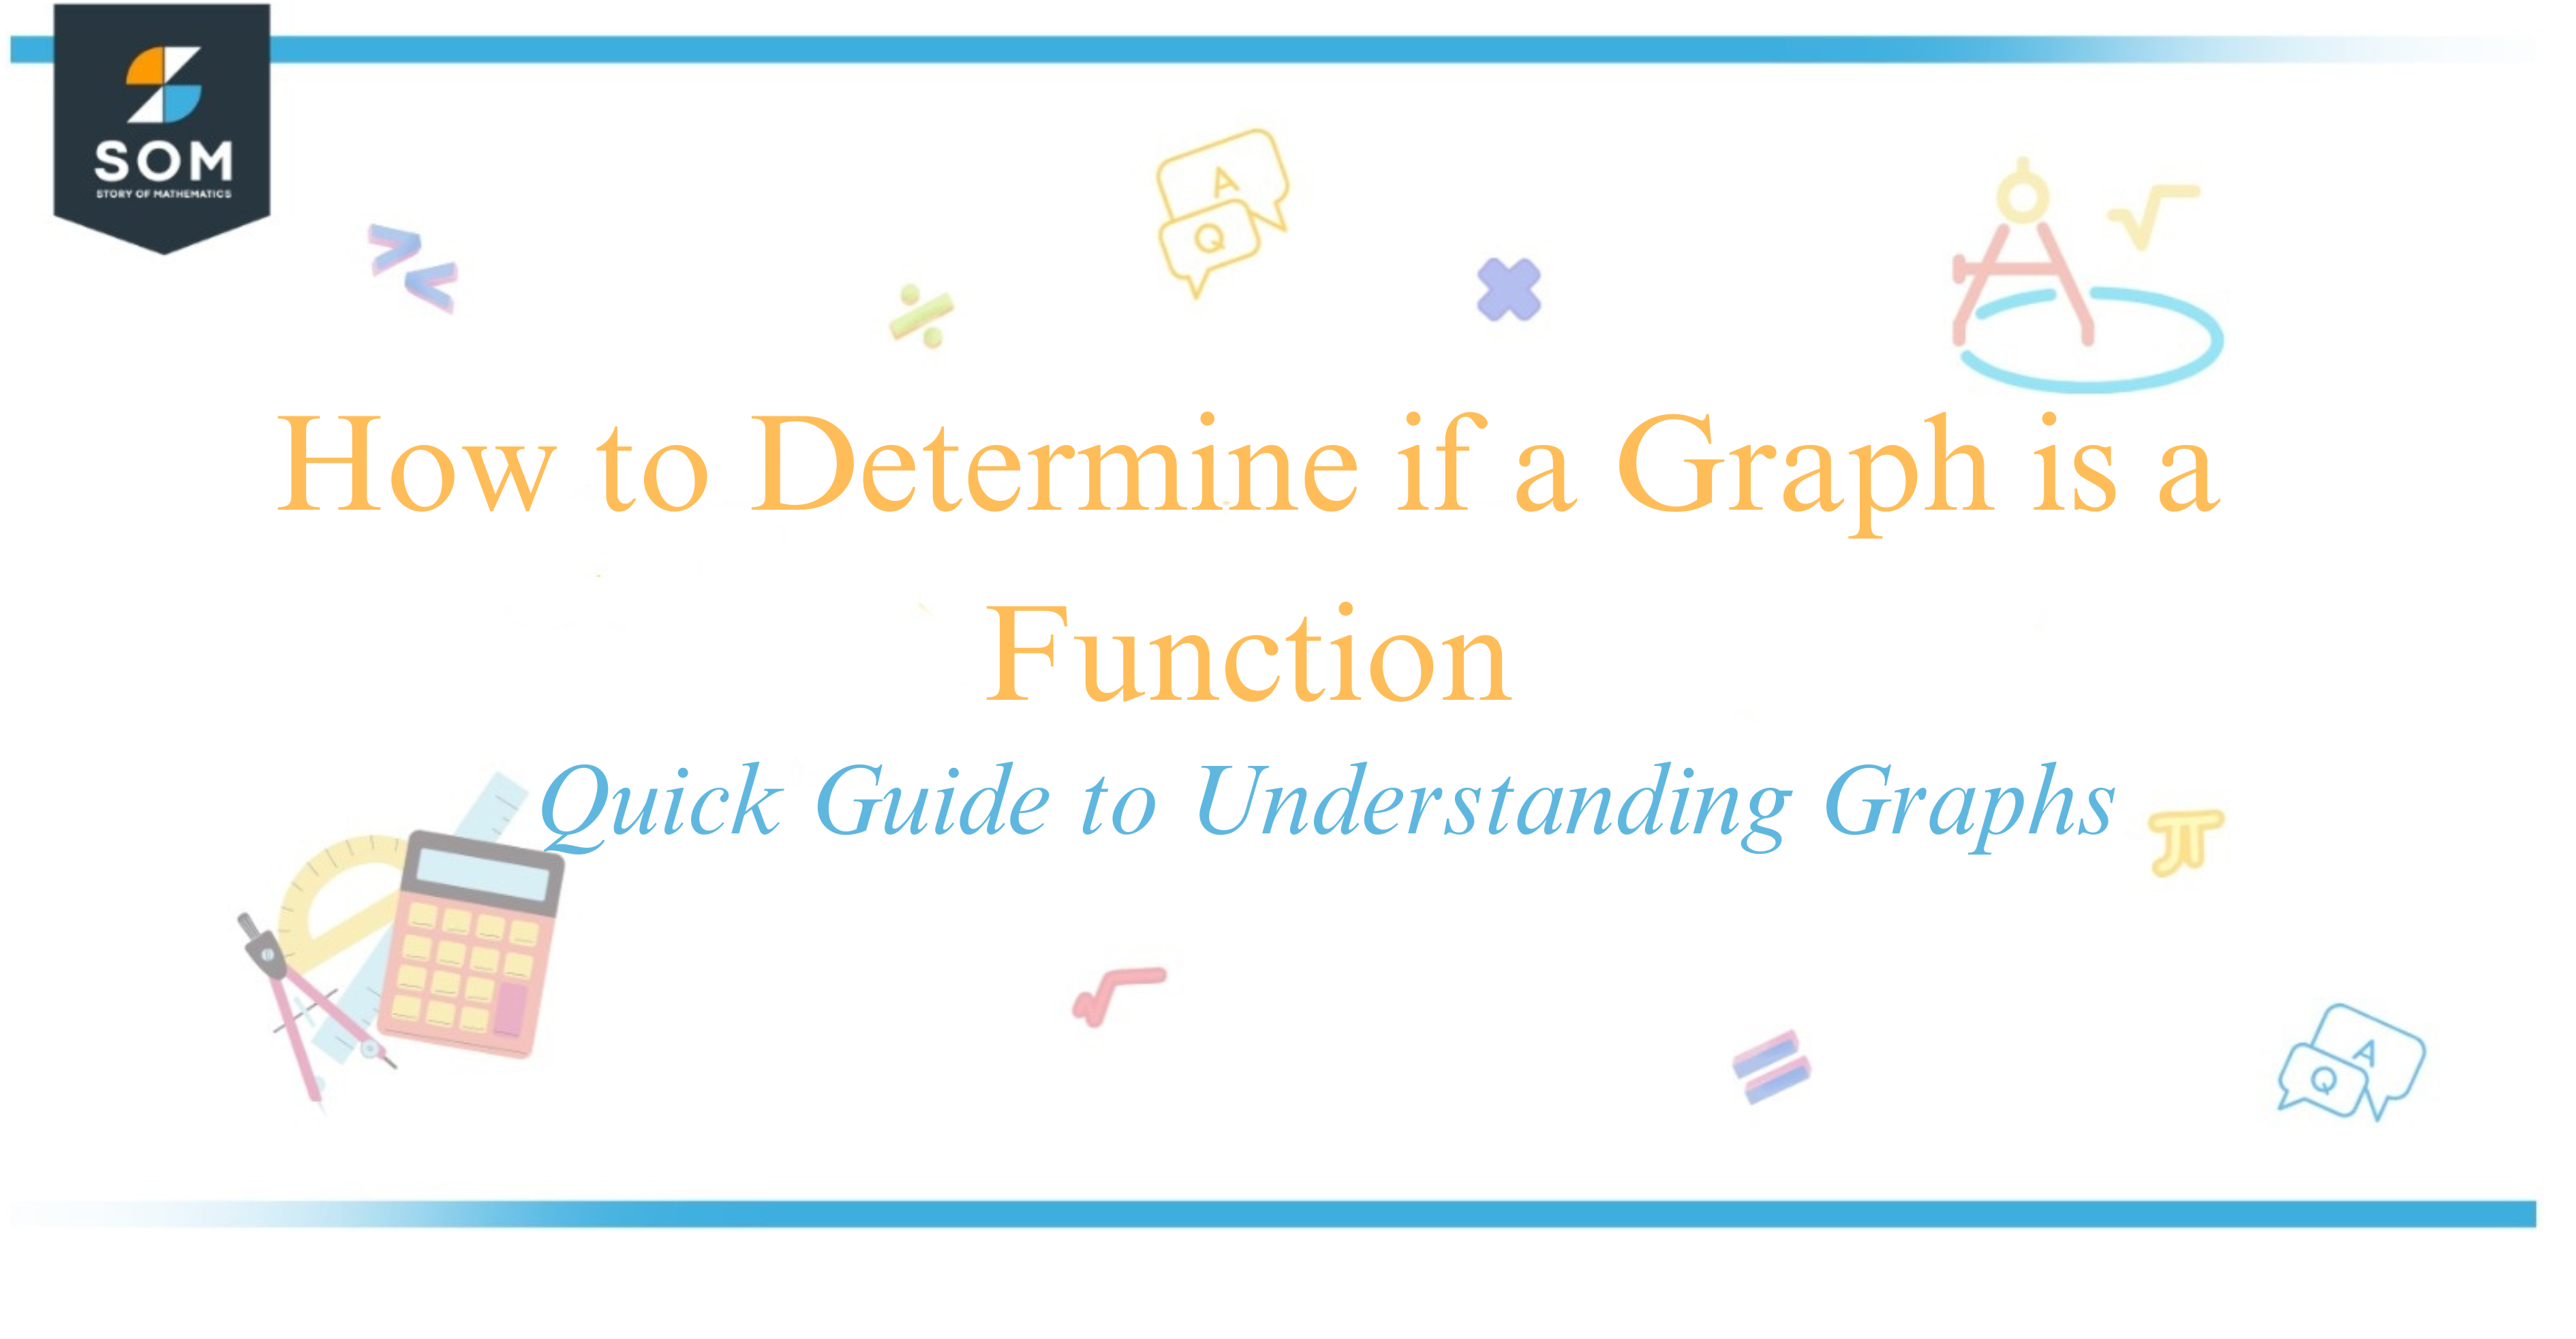 How to Determine if a Graph is a Function Quick Guide to Understanding Graphs